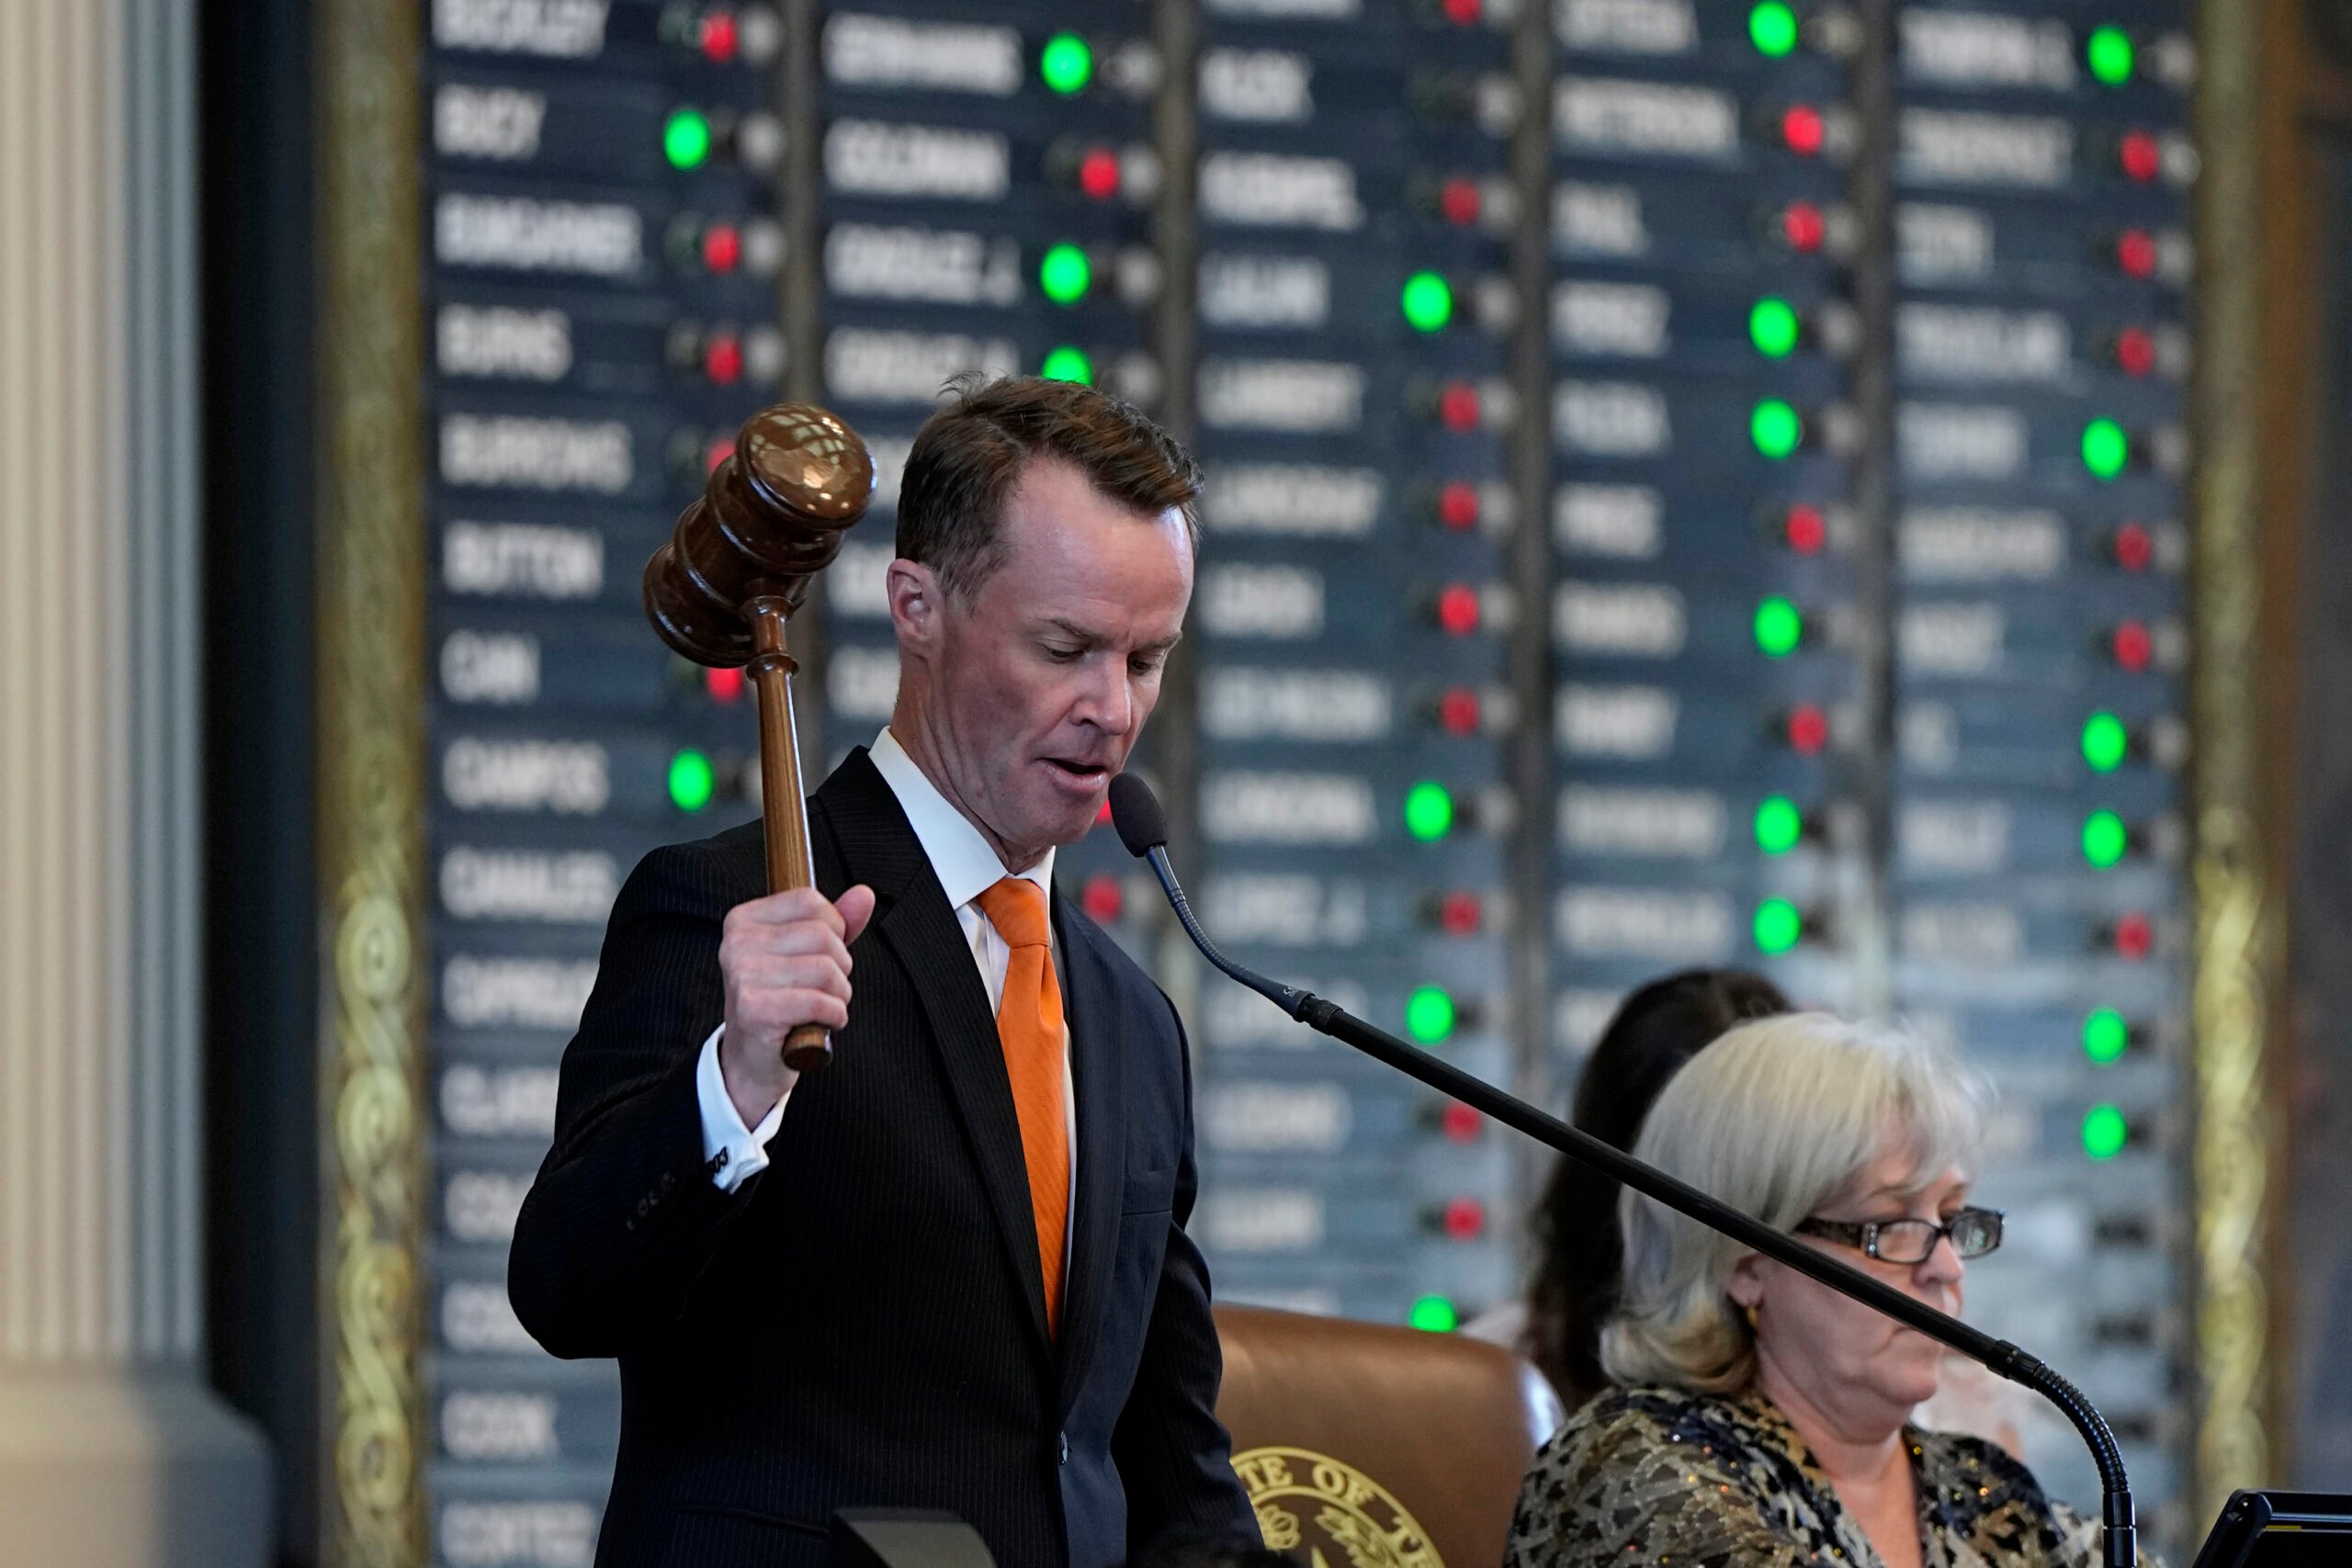 Dade Phelan, a white man in a suit and tie, prepares to bang his gavel. Behind him is a light board showing how different representatives vote on the current bill.